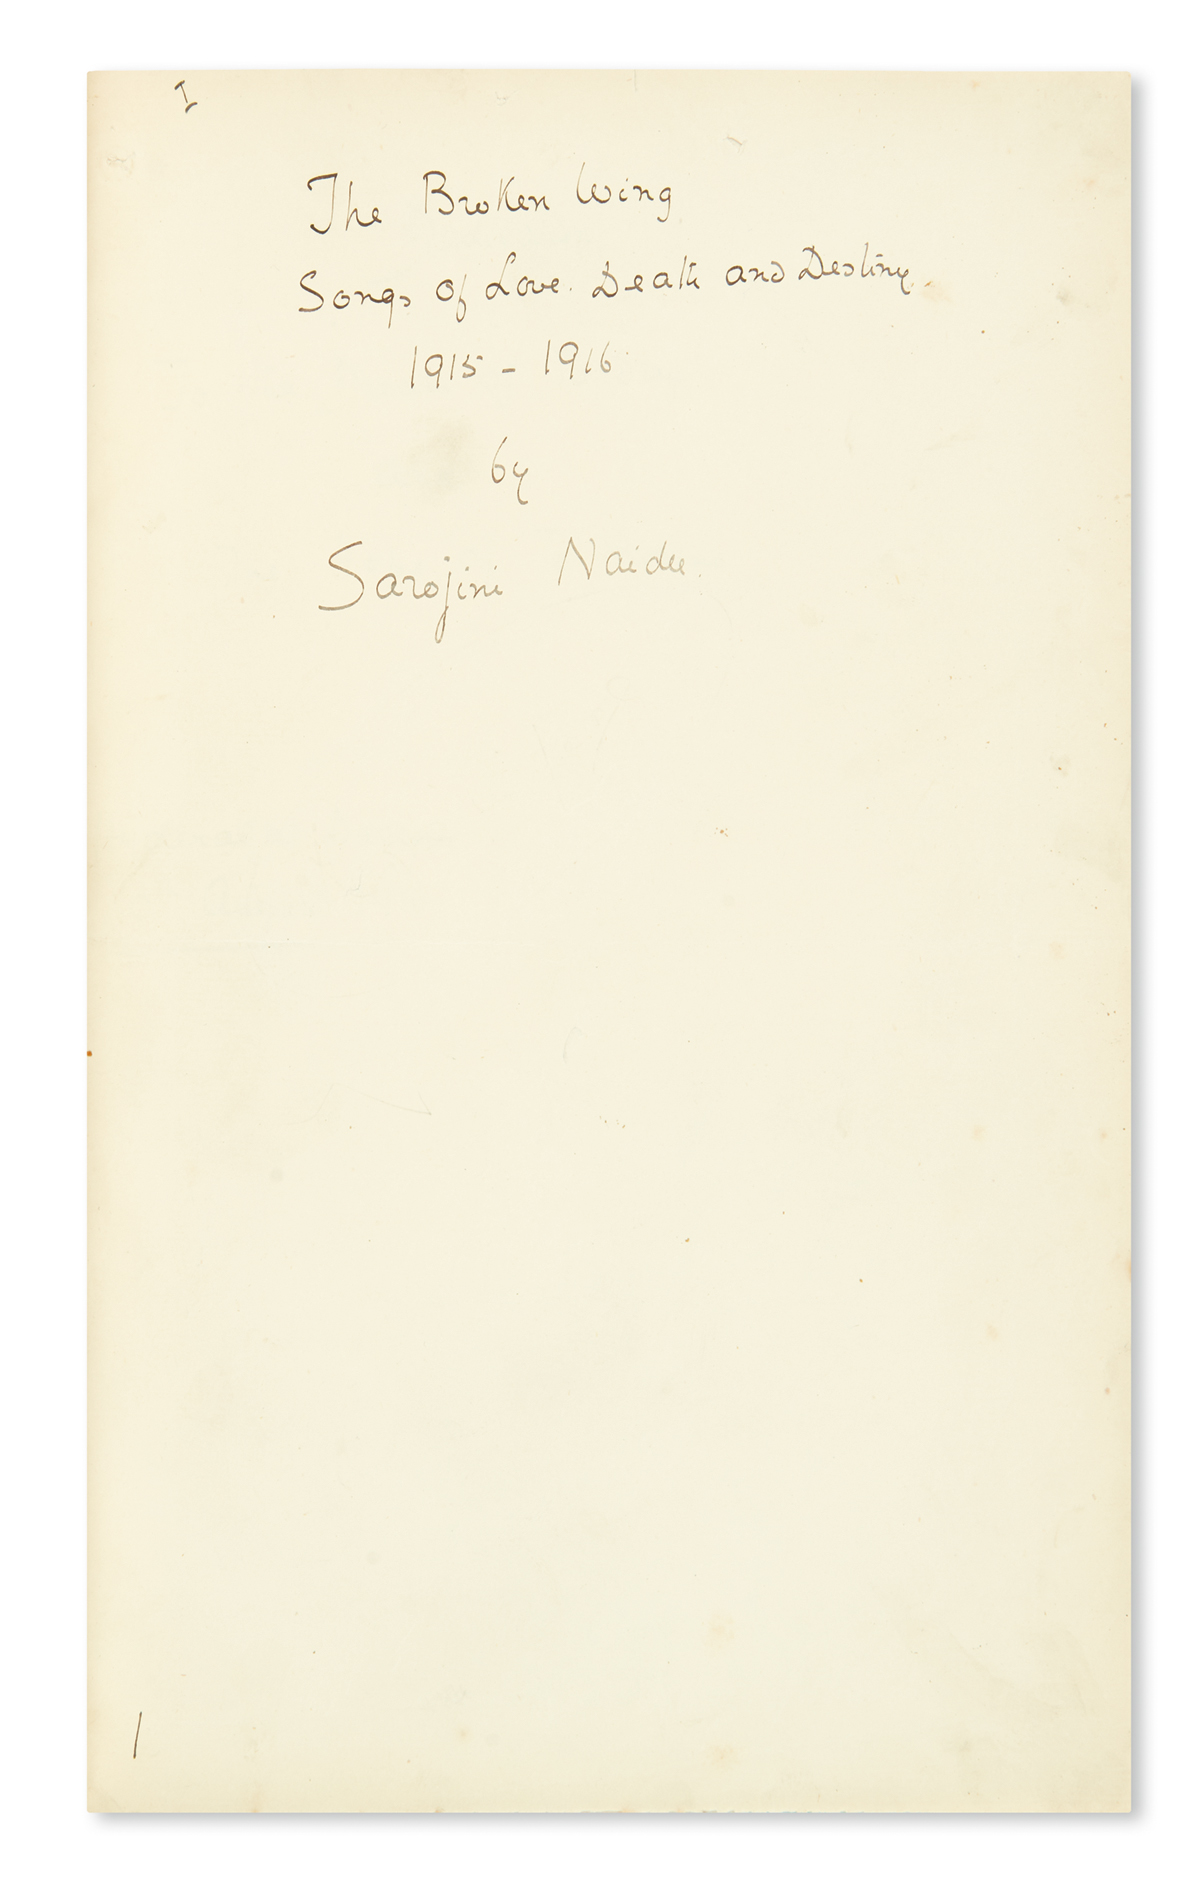 NAIDU, SAROJINI. Complete galley proof of her book The Broken Wing mounted to recto pages bound into a book, Signed 7 times, including